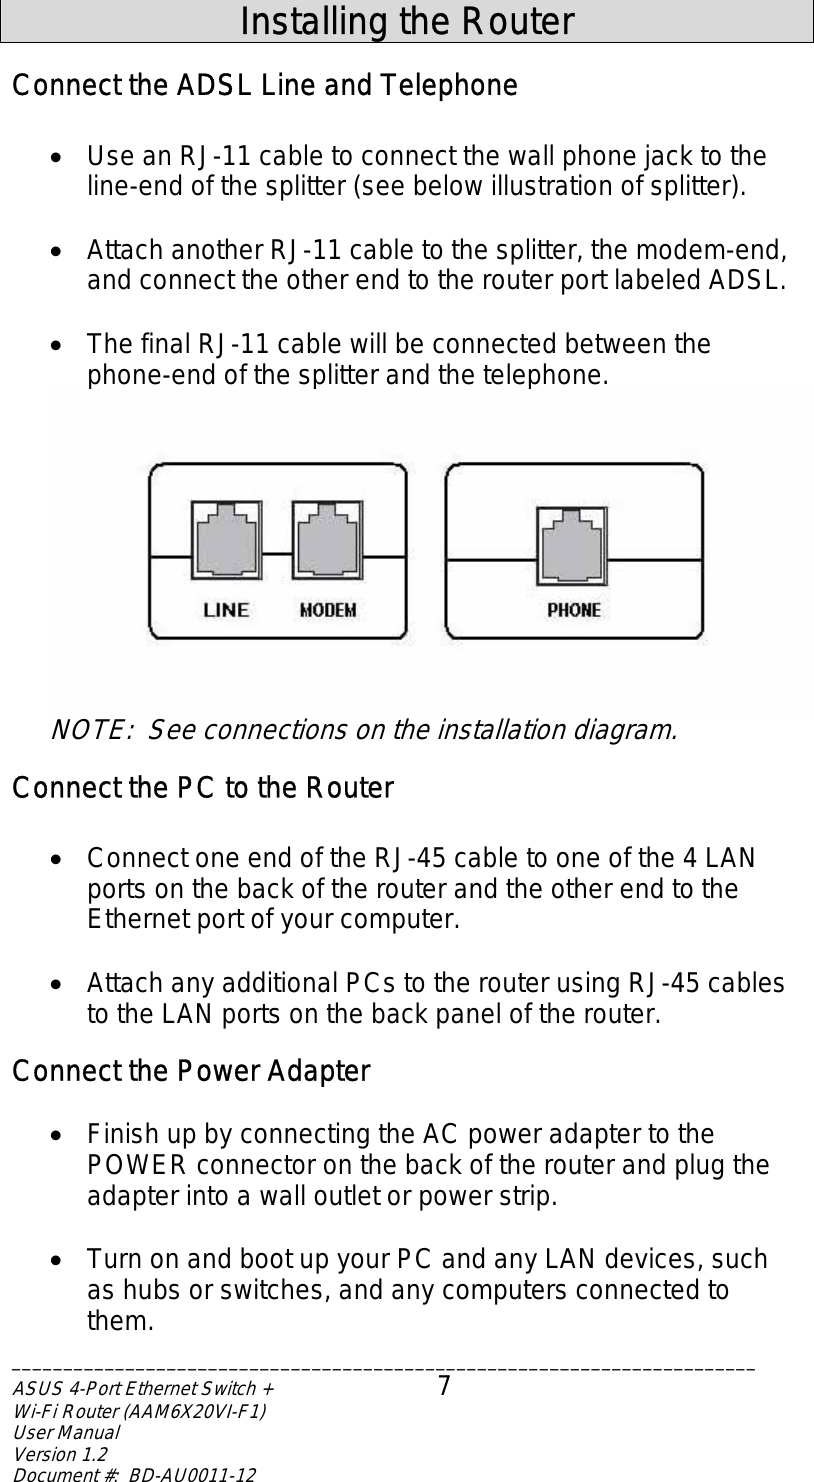  Installing the Router Connect the ADSL Line and Telephone  •  Use an RJ-11 cable to connect the wall phone jack to the line-end of the splitter (see below illustration of splitter).  •  Attach another RJ-11 cable to the splitter, the modem-end, and connect the other end to the router port labeled ADSL.  •  The final RJ-11 cable will be connected between the phone-end of the splitter and the telephone.  NOTE:  See connections on the installation diagram. Connect the PC to the Router  •  Connect one end of the RJ-45 cable to one of the 4 LAN ports on the back of the router and the other end to the Ethernet port of your computer.    •  Attach any additional PCs to the router using RJ-45 cables to the LAN ports on the back panel of the router. Connect the Power Adapter  •  Finish up by connecting the AC power adapter to the POWER connector on the back of the router and plug the adapter into a wall outlet or power strip.  •  Turn on and boot up your PC and any LAN devices, such as hubs or switches, and any computers connected to them. ________________________________________________________________________ASUS 4-Port Ethernet Switch +  7 Wi-Fi Router (AAM6X20VI-F1) User Manual                                                                         Version 1.2 Document #:  BD-AU0011-12  